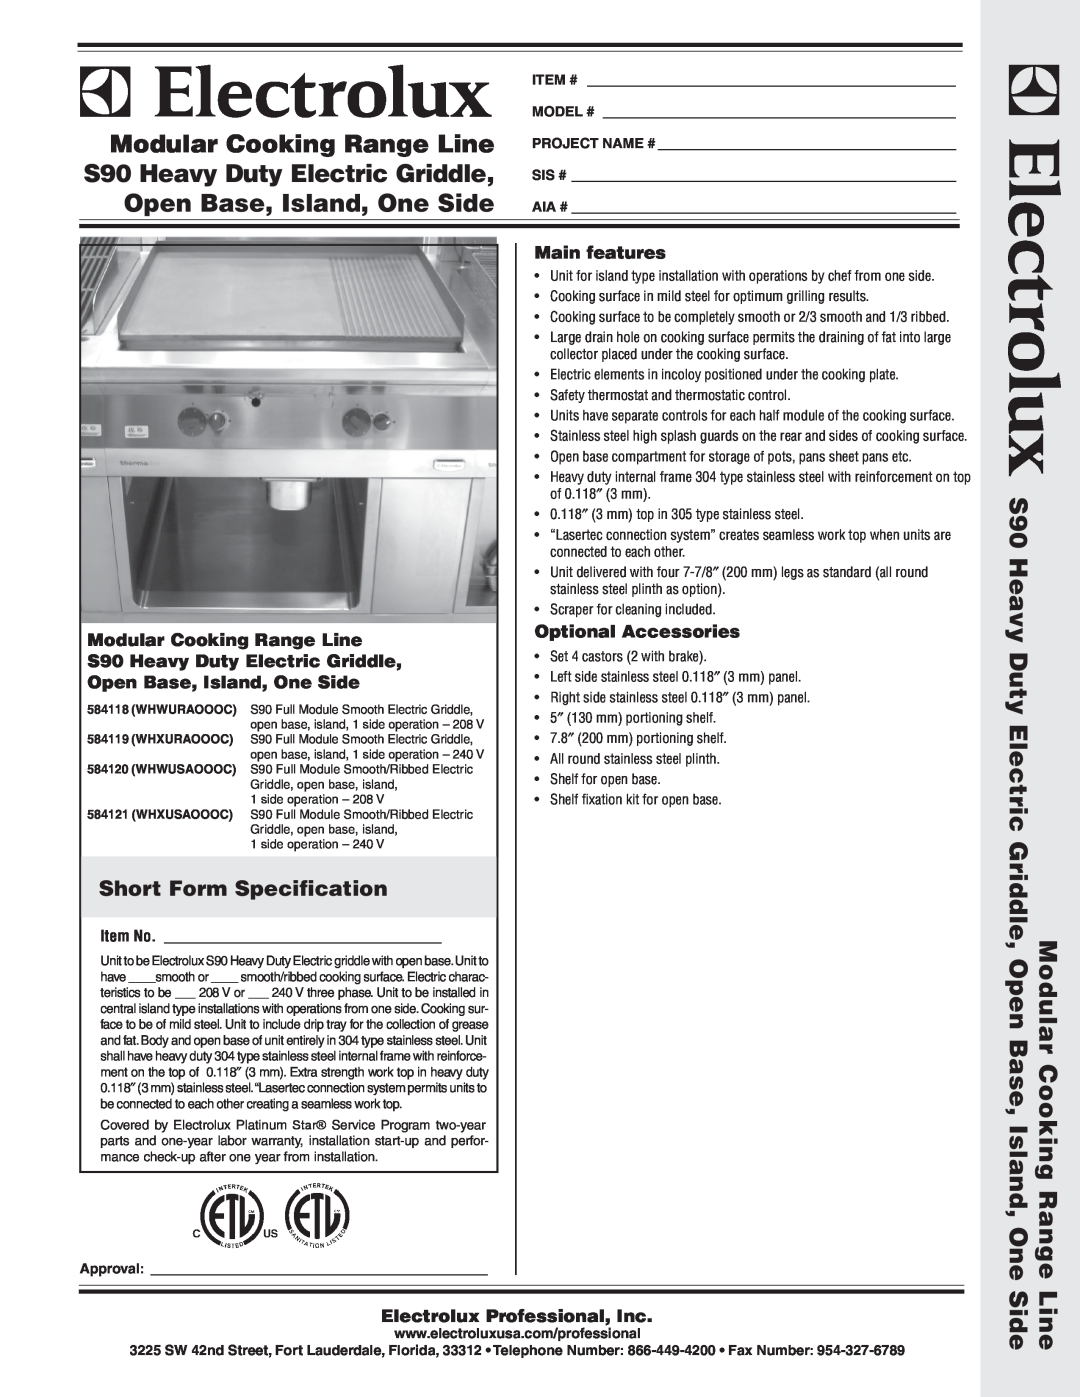 Electrolux WHWUSAOOOC warranty Short Form Specification, Main features, Modular Cooking Range Line, Optional Accessories 